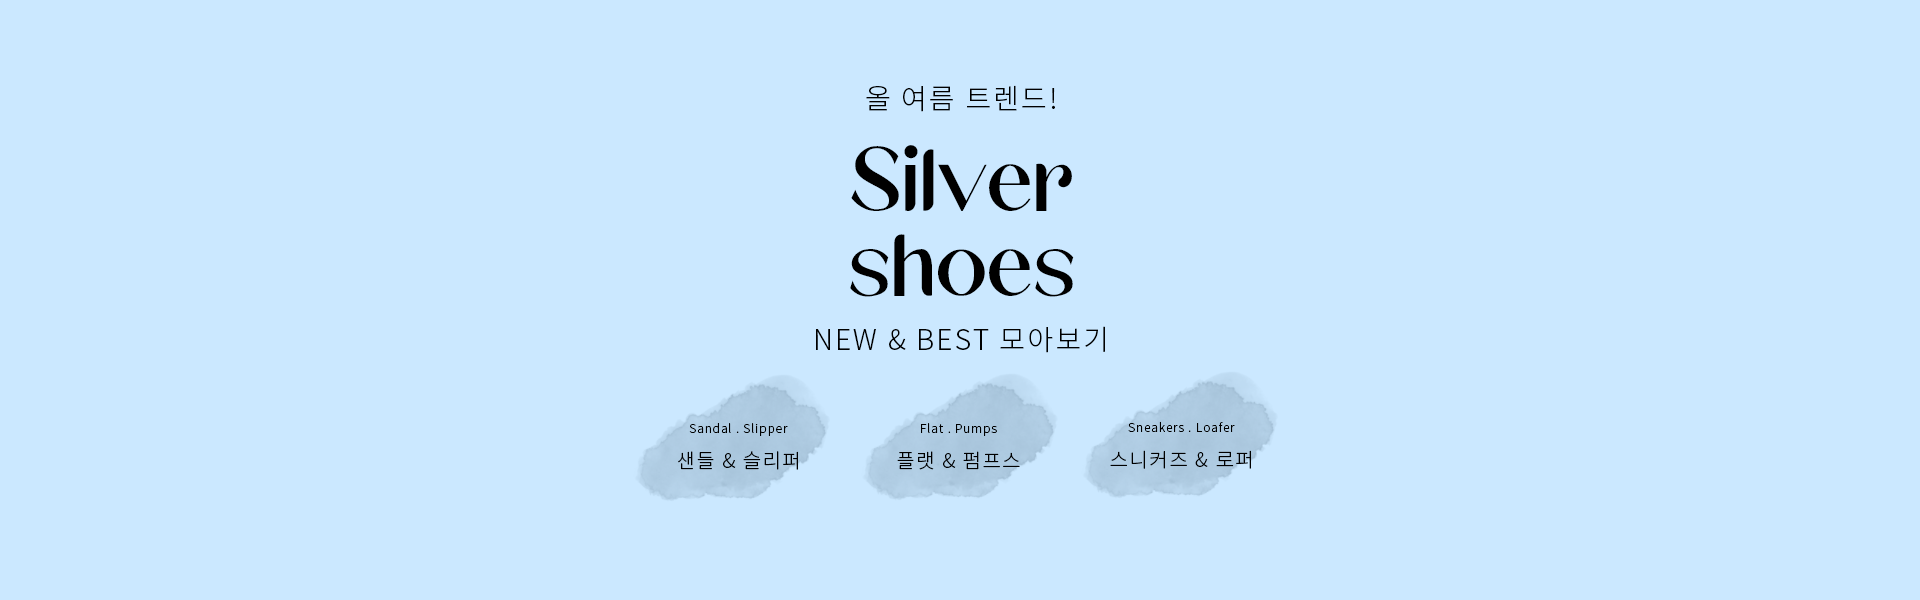 24 S/S -SUMMER TREND / SILVER SHOES NEW & BEST ƺ